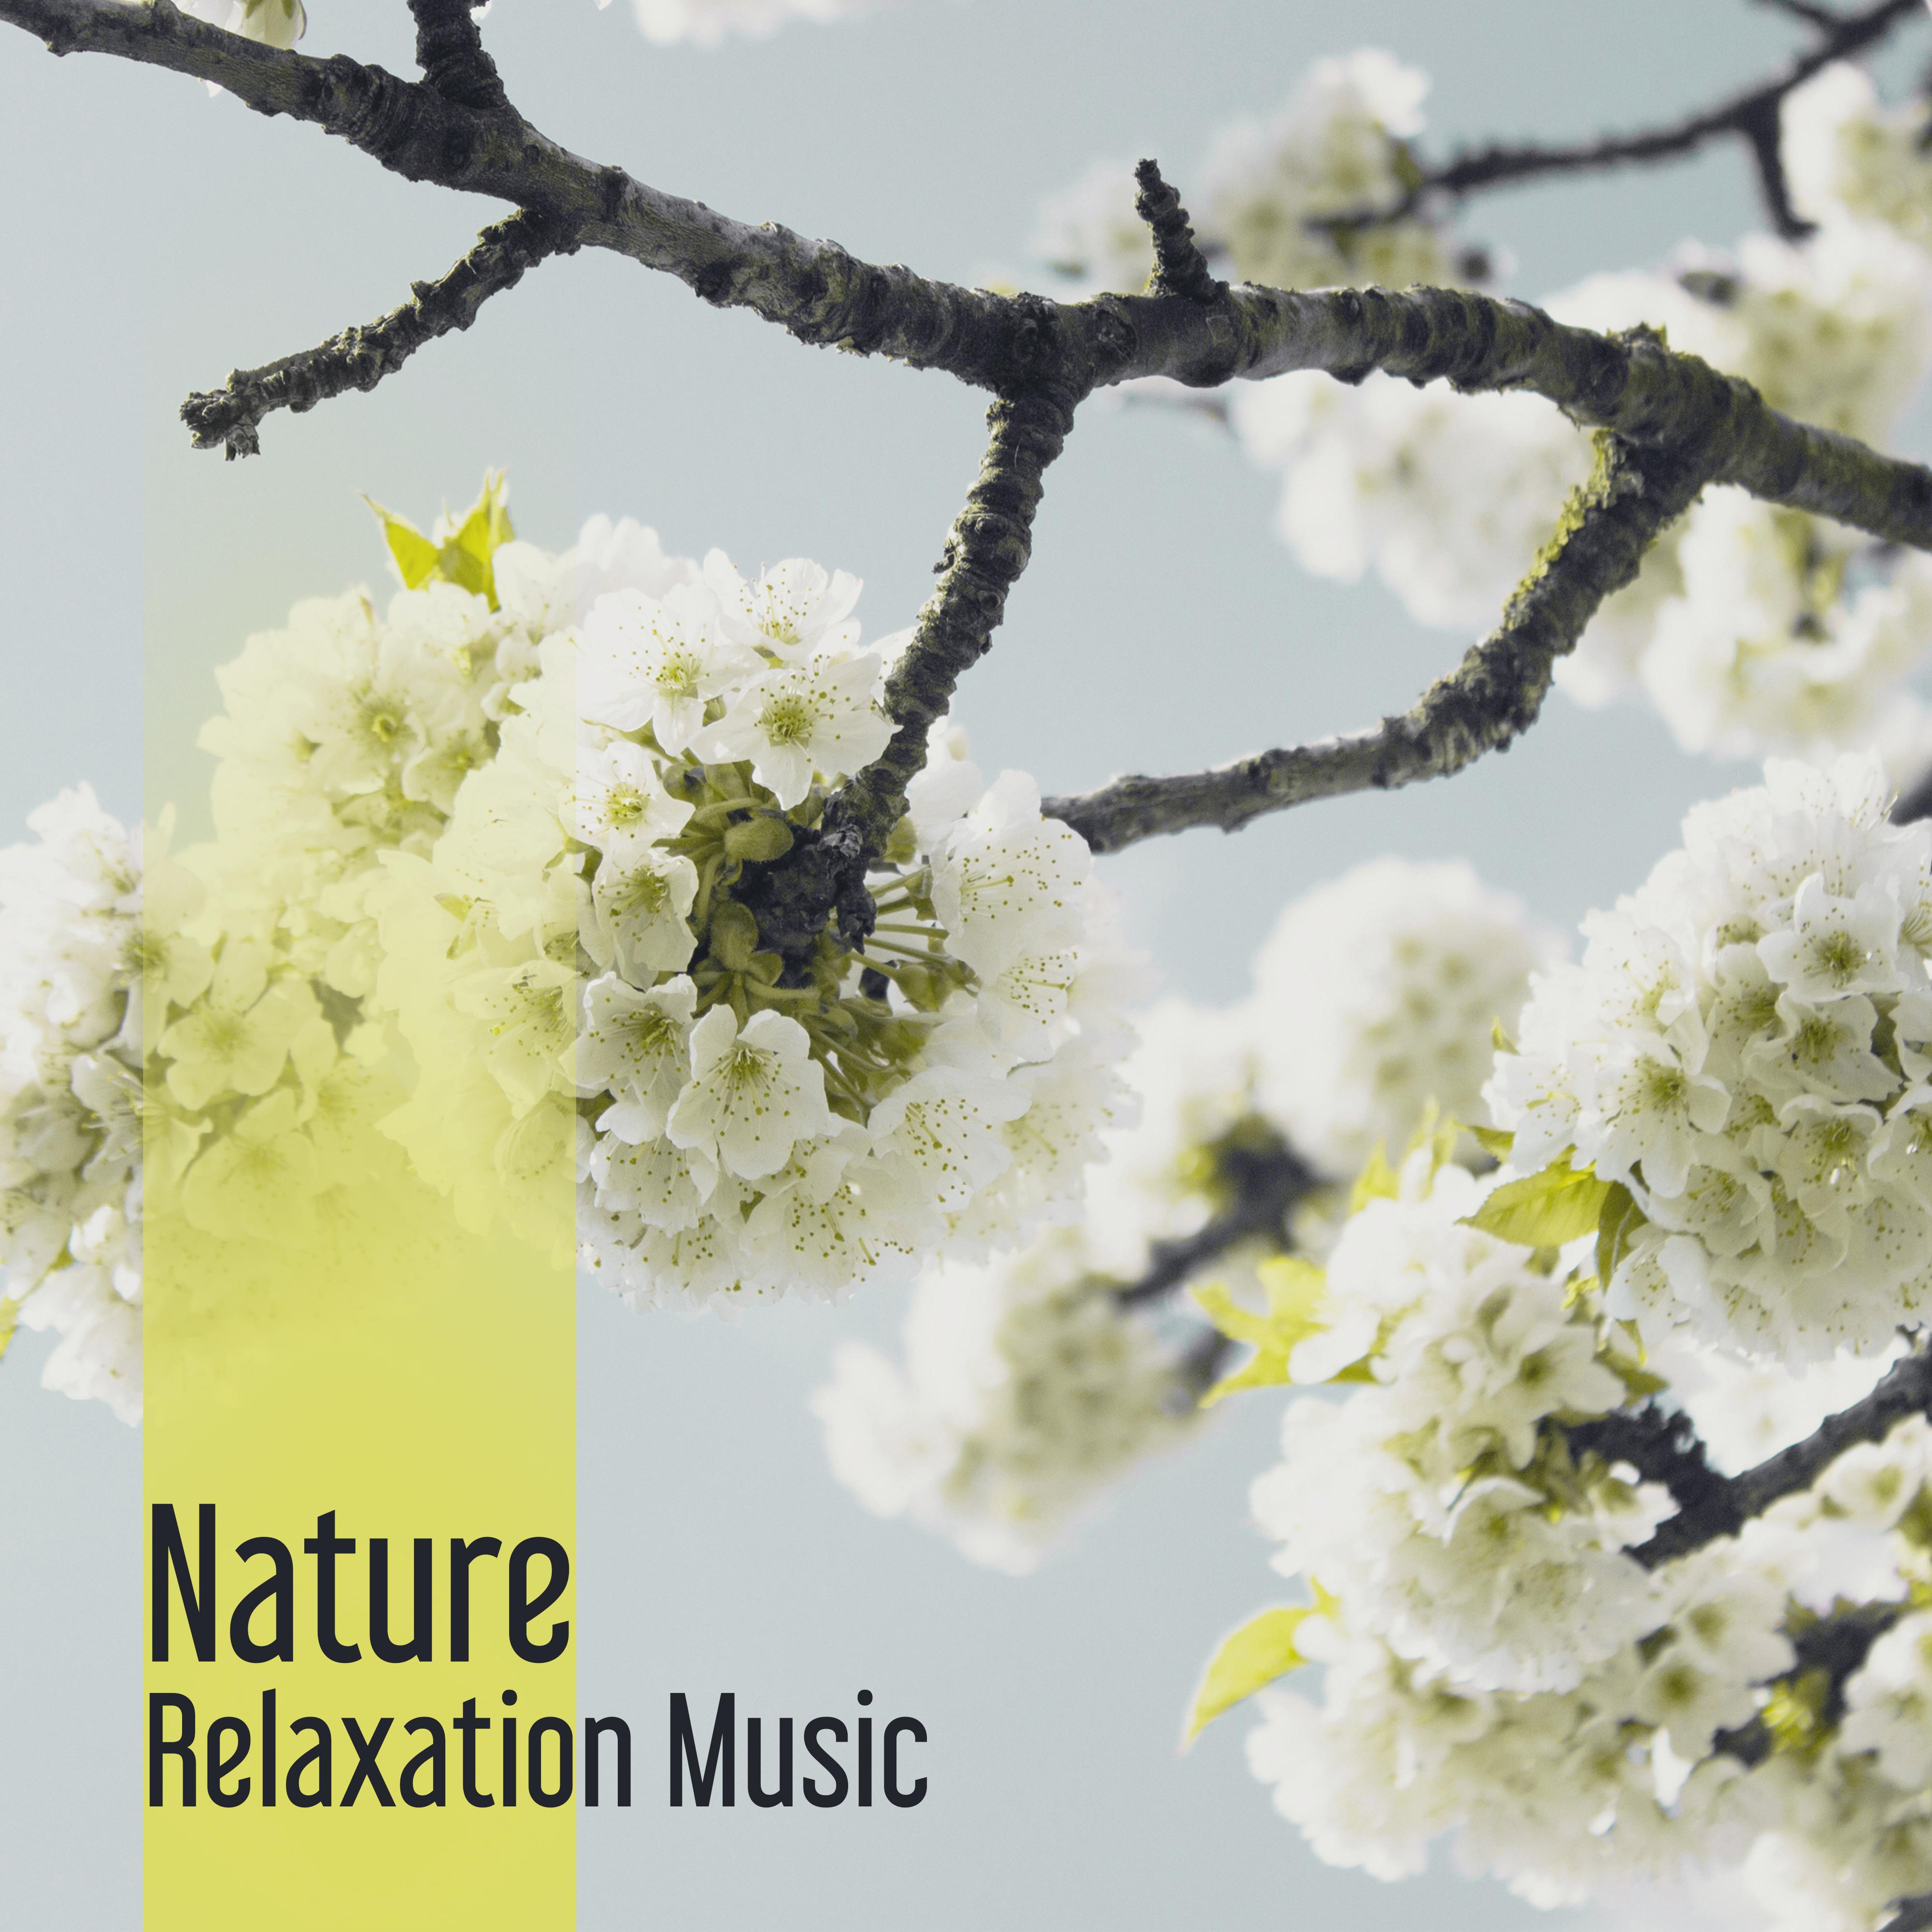 Nature Relaxation Music  Soothing New Age Sounds, Music to Calm Down, Rest  Relax, Nature Healing Waves, Inner Silence